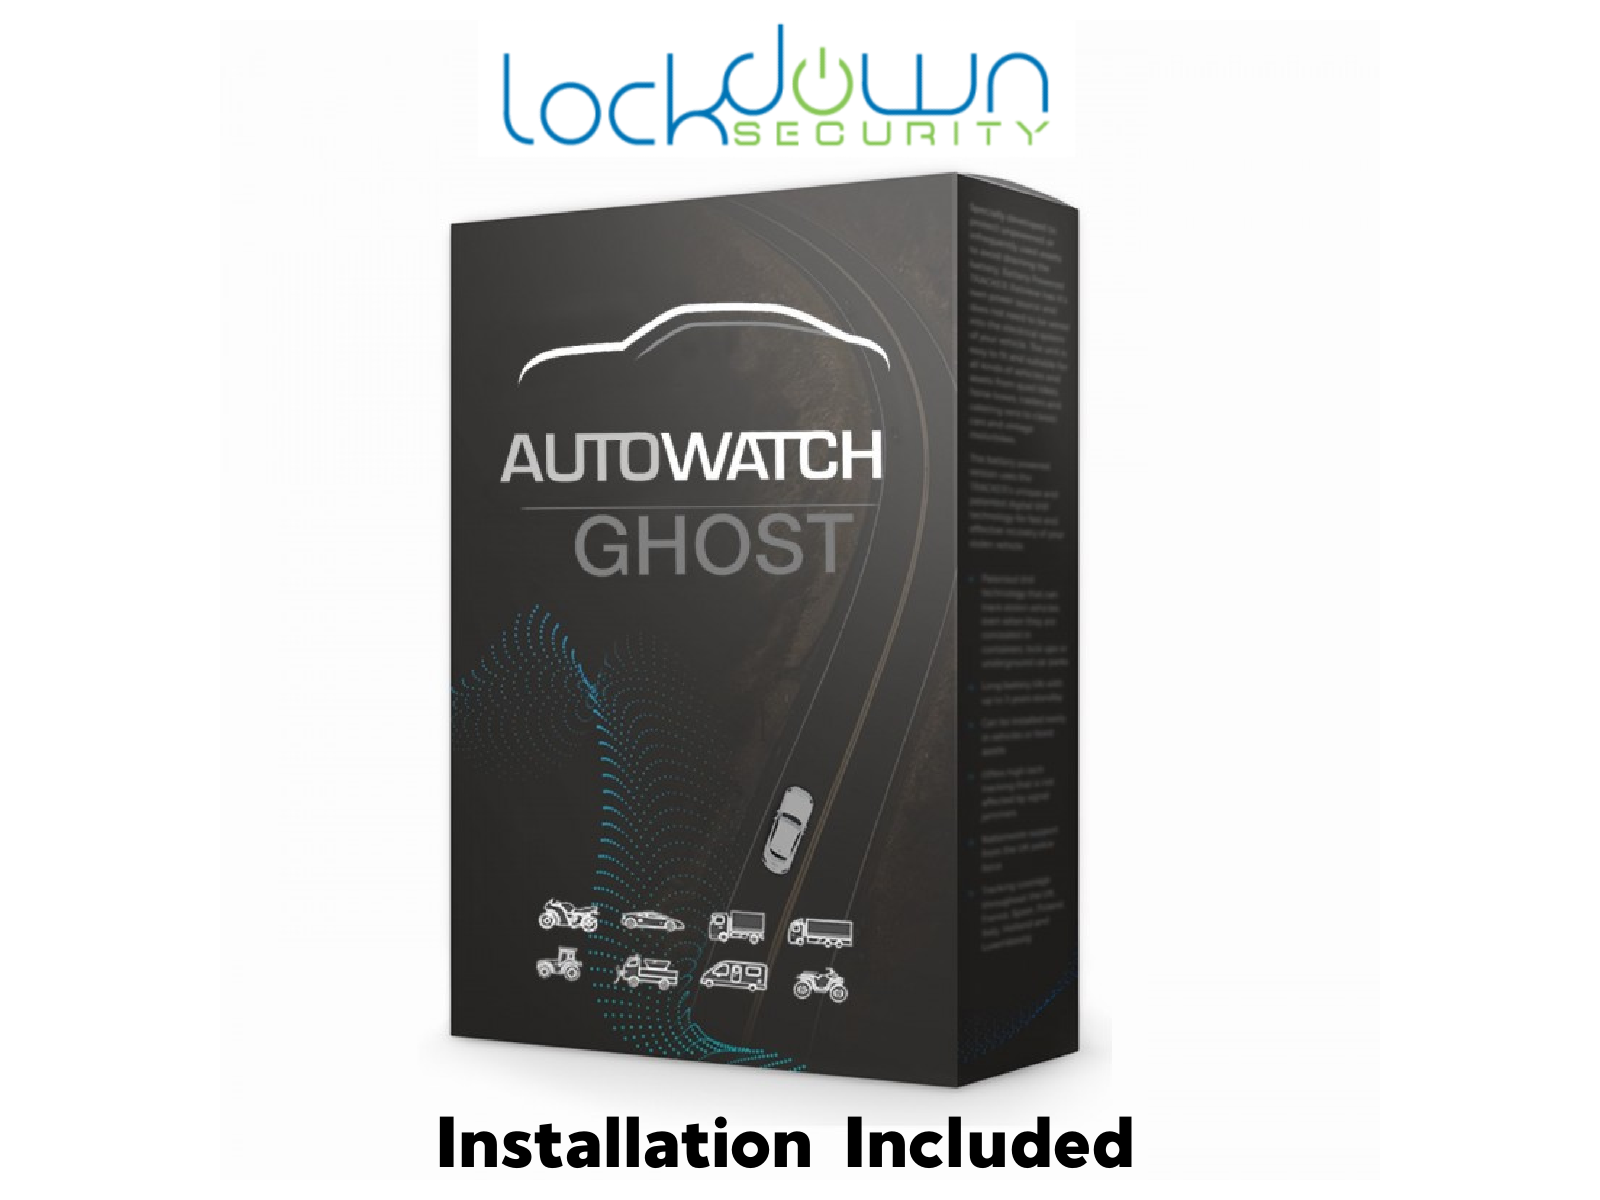 [Installed Bundle] Autowatch GHOST2 Digital Anti Theft System - Lockdown Security